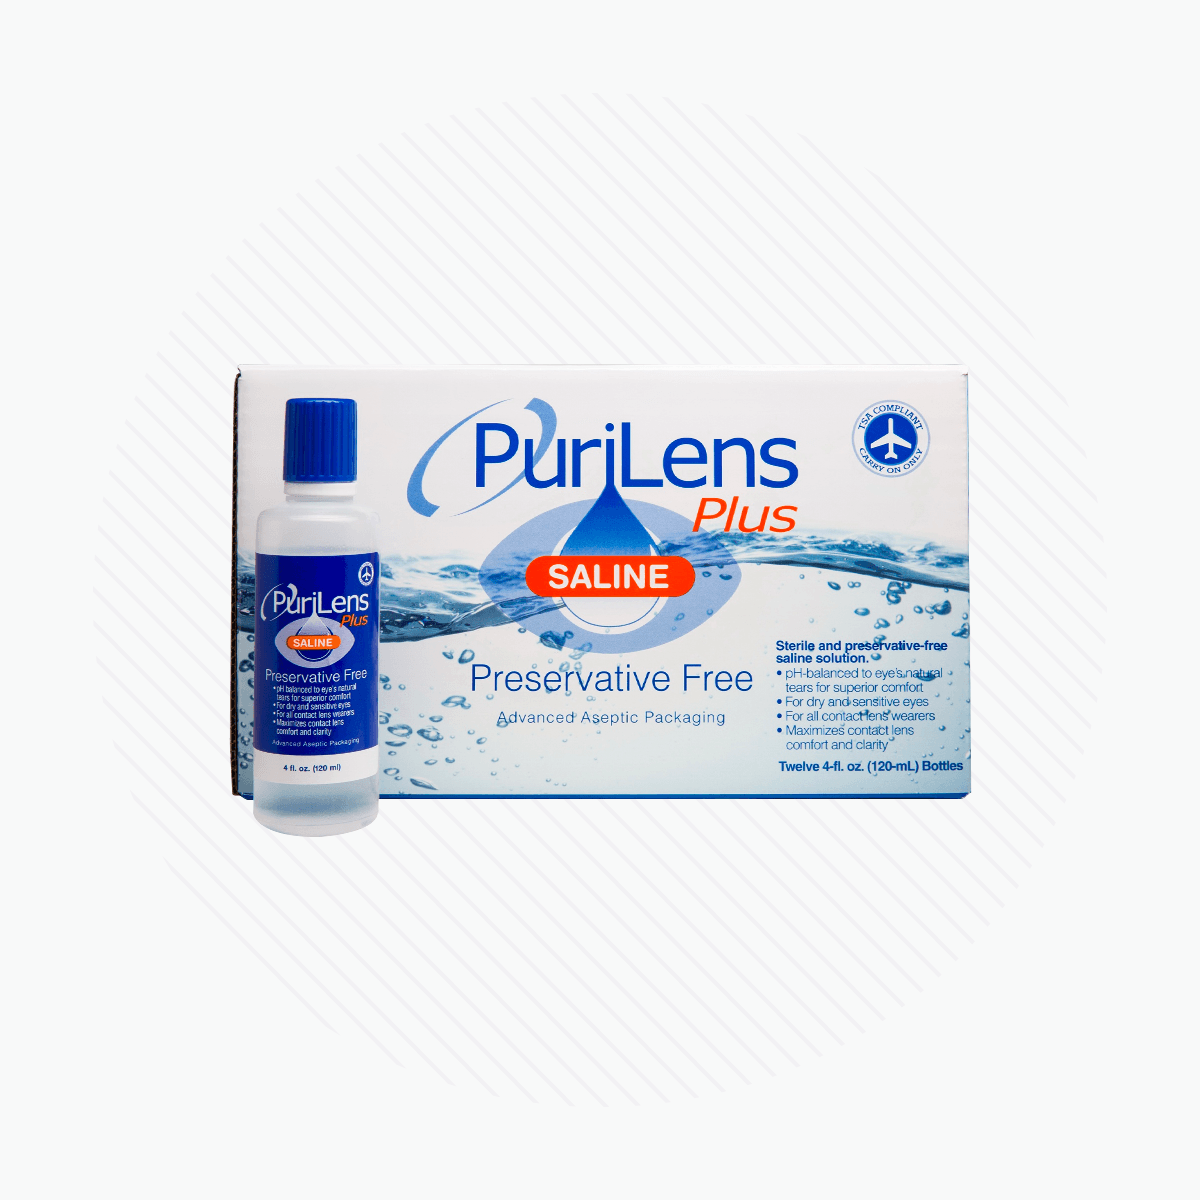 PuriLens Plus Preservative Free Saline (Multiple Sizes and Packs) - DryEye Rescue Store